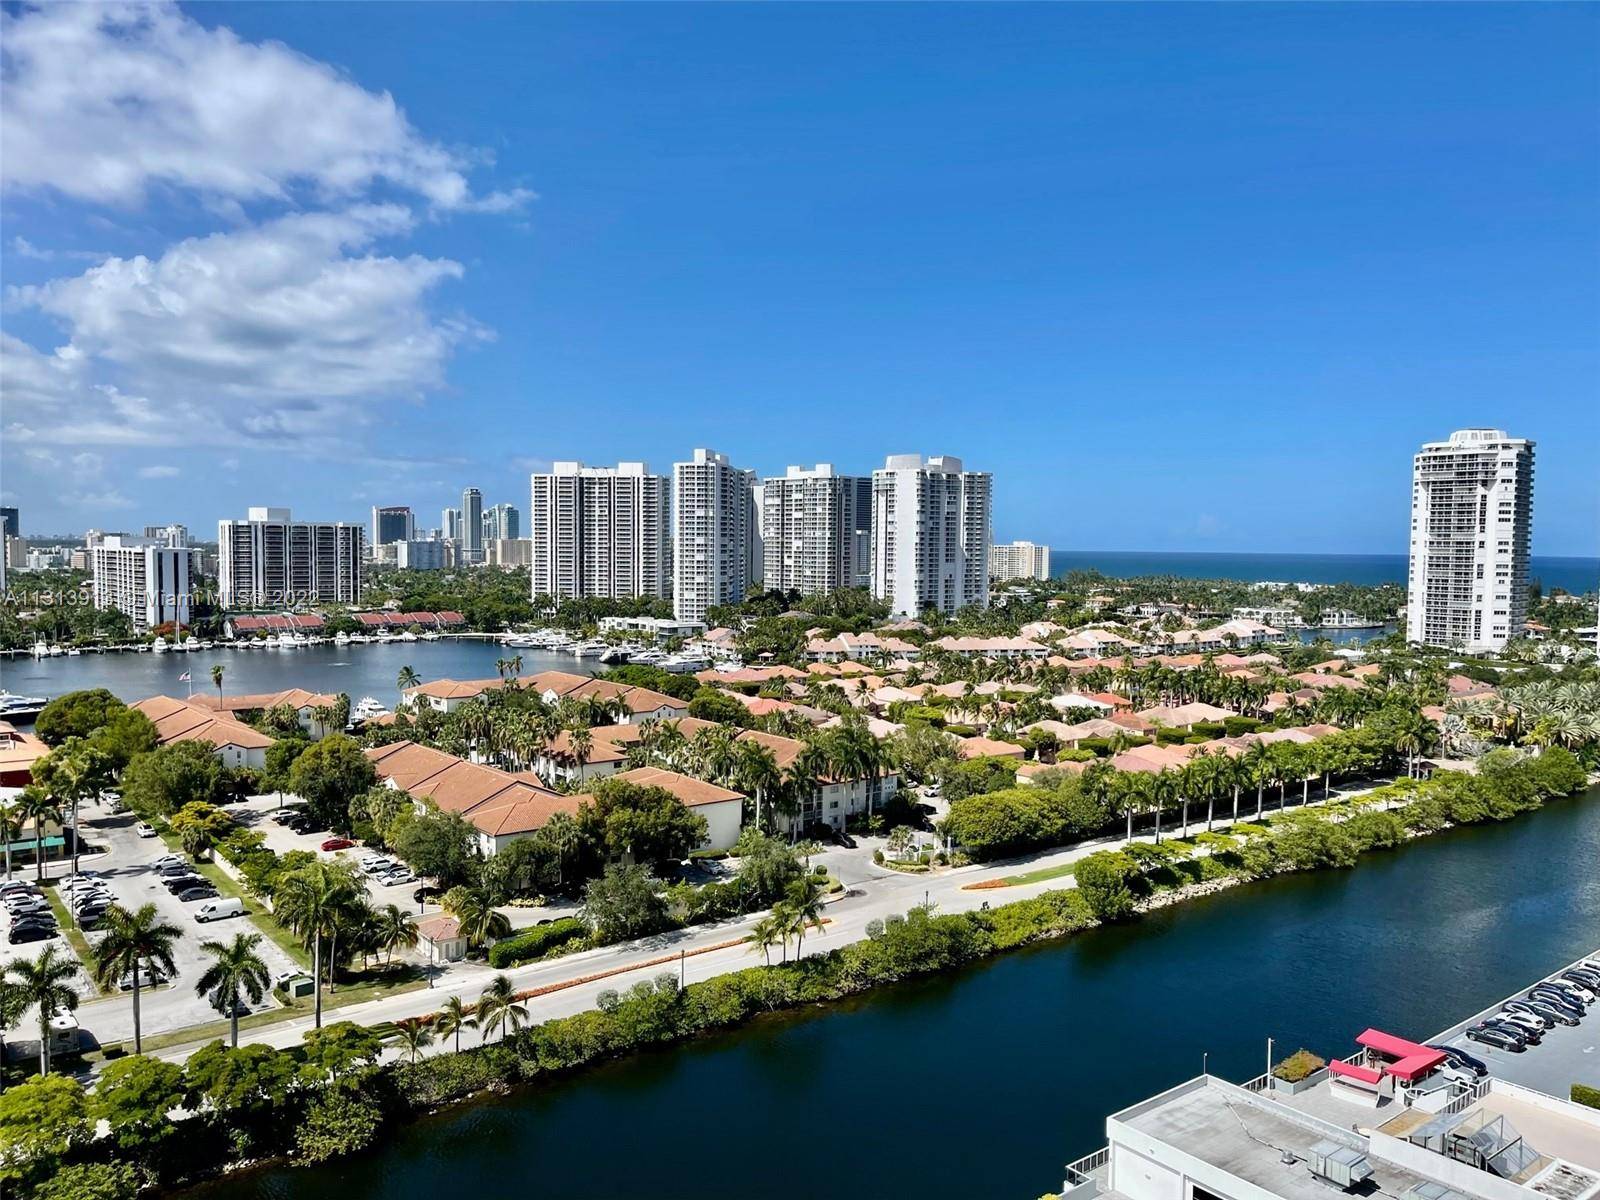 STUNNIG VIEWS LOCATED IN THE HEART OF AVENTURA 2 FULL BEDROOM AND 2 BATHS, LAKE AND GOLF COURSE VIEW IN ONE OF THE BEST LOCATIONS.